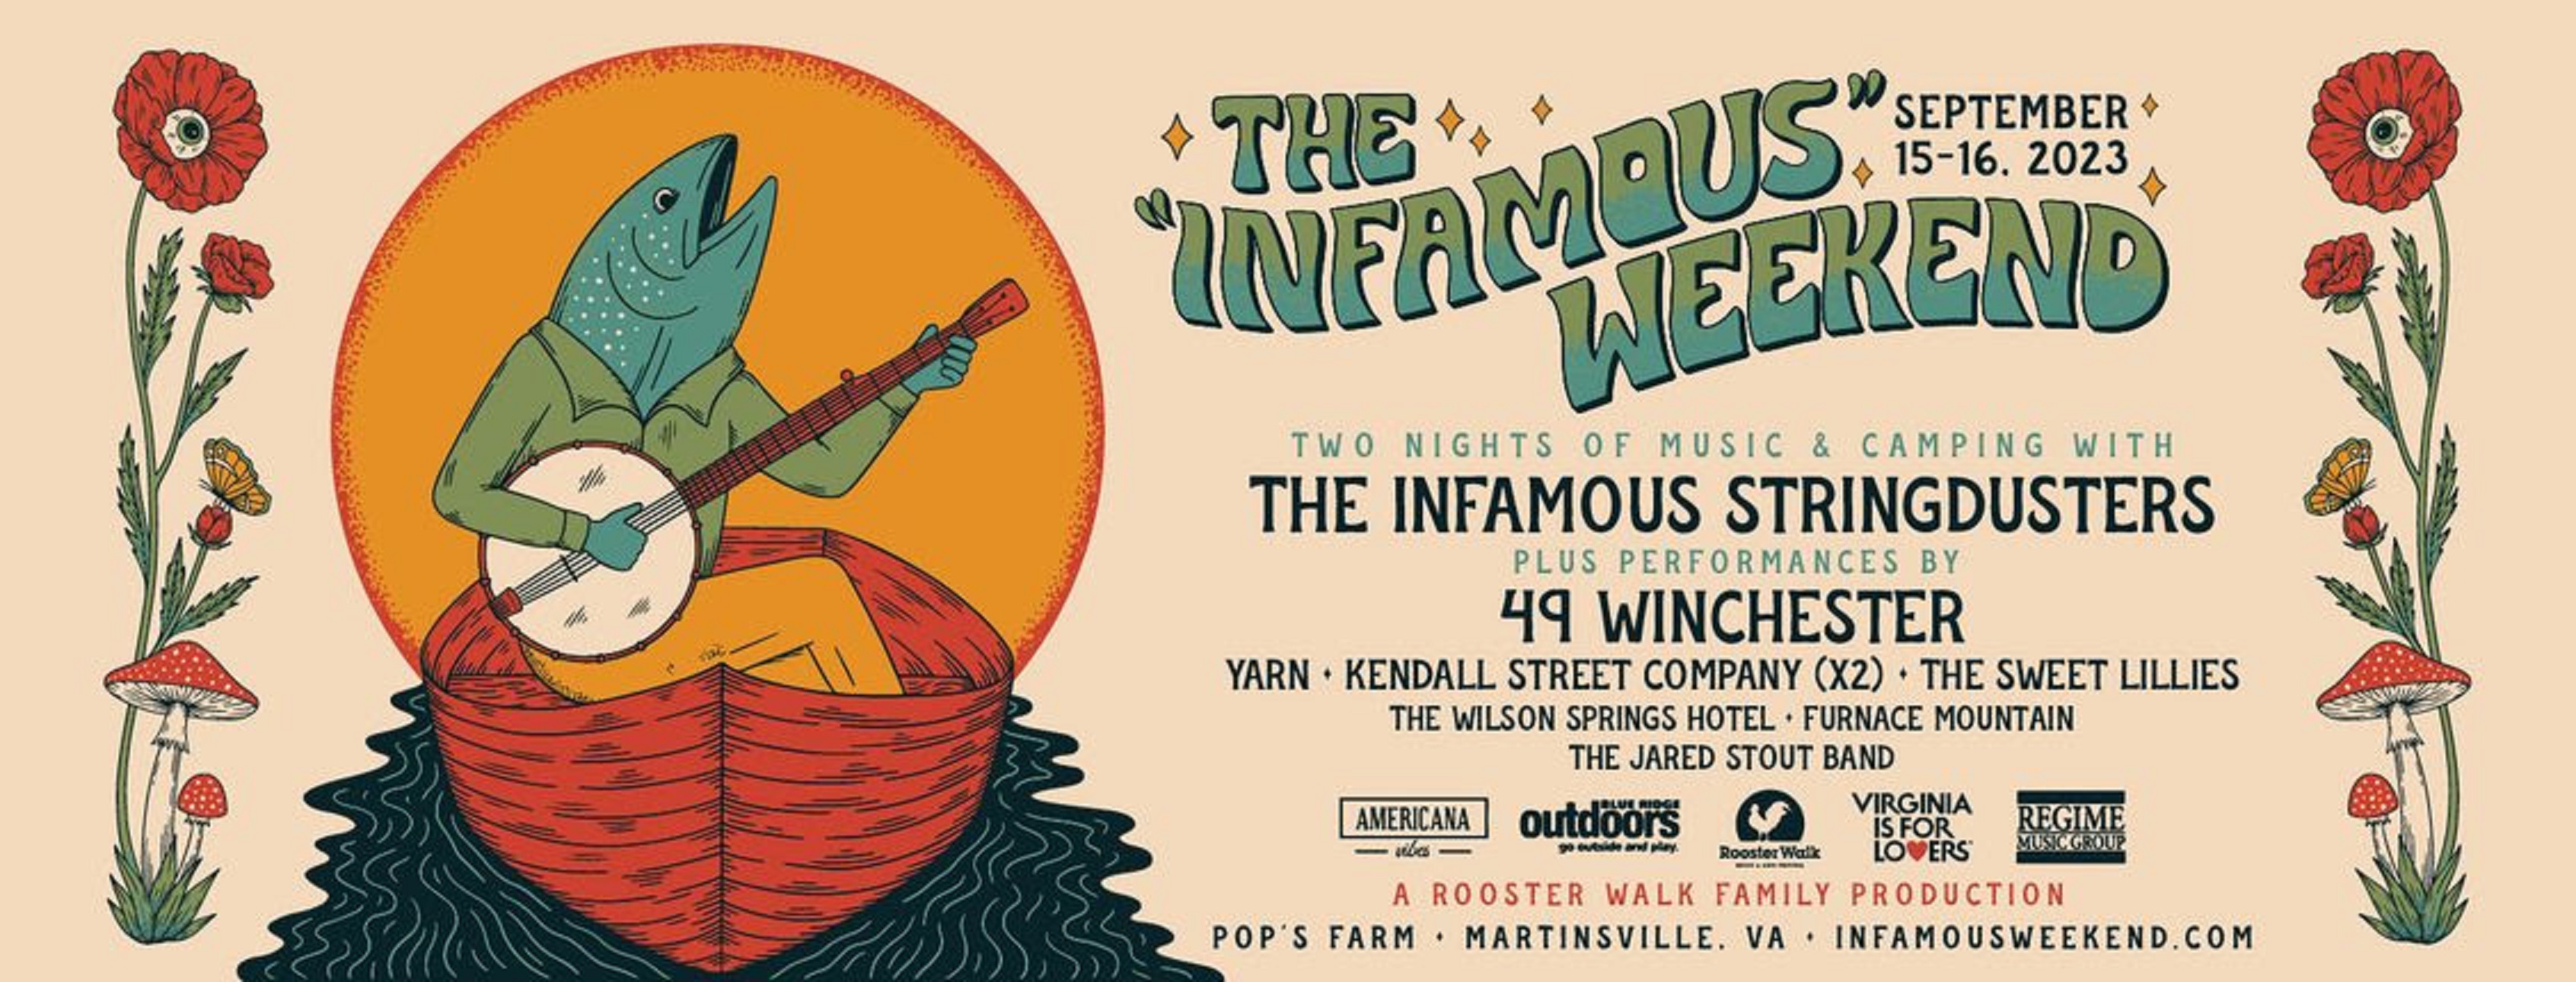 ‘The Infamous Weekend’ to debut September 15-16 at Pop’s Farm in Martinsville, Va.